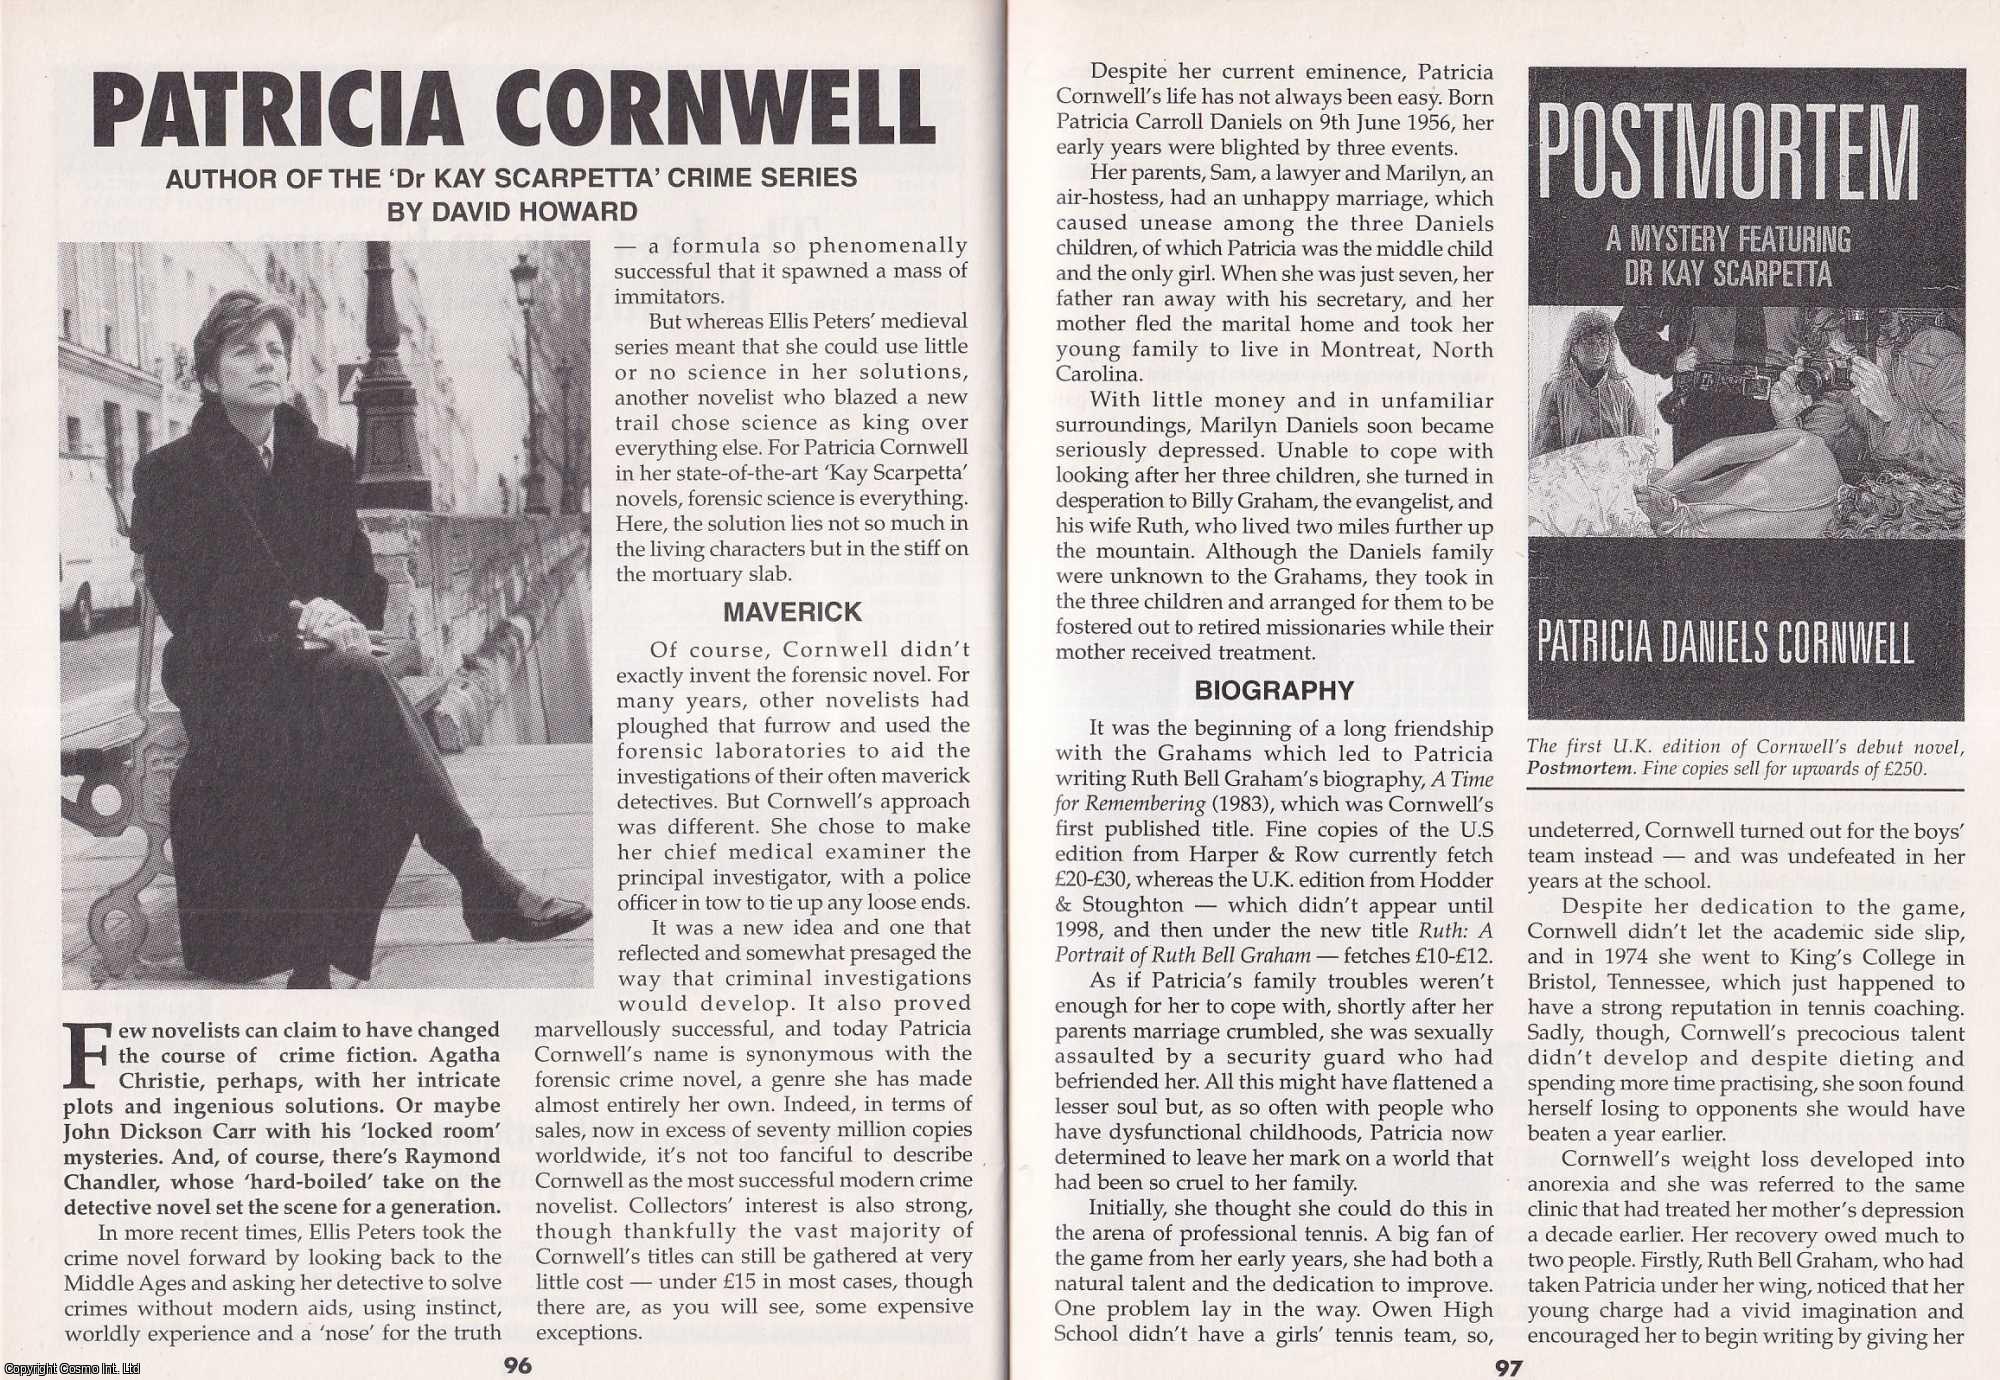 David Howard - Patricia Cornwell. Author of The Dr. Kay Scarpetta Crime Series. This is an original article separated from an issue of The Book & Magazine Collector publication, 2001.